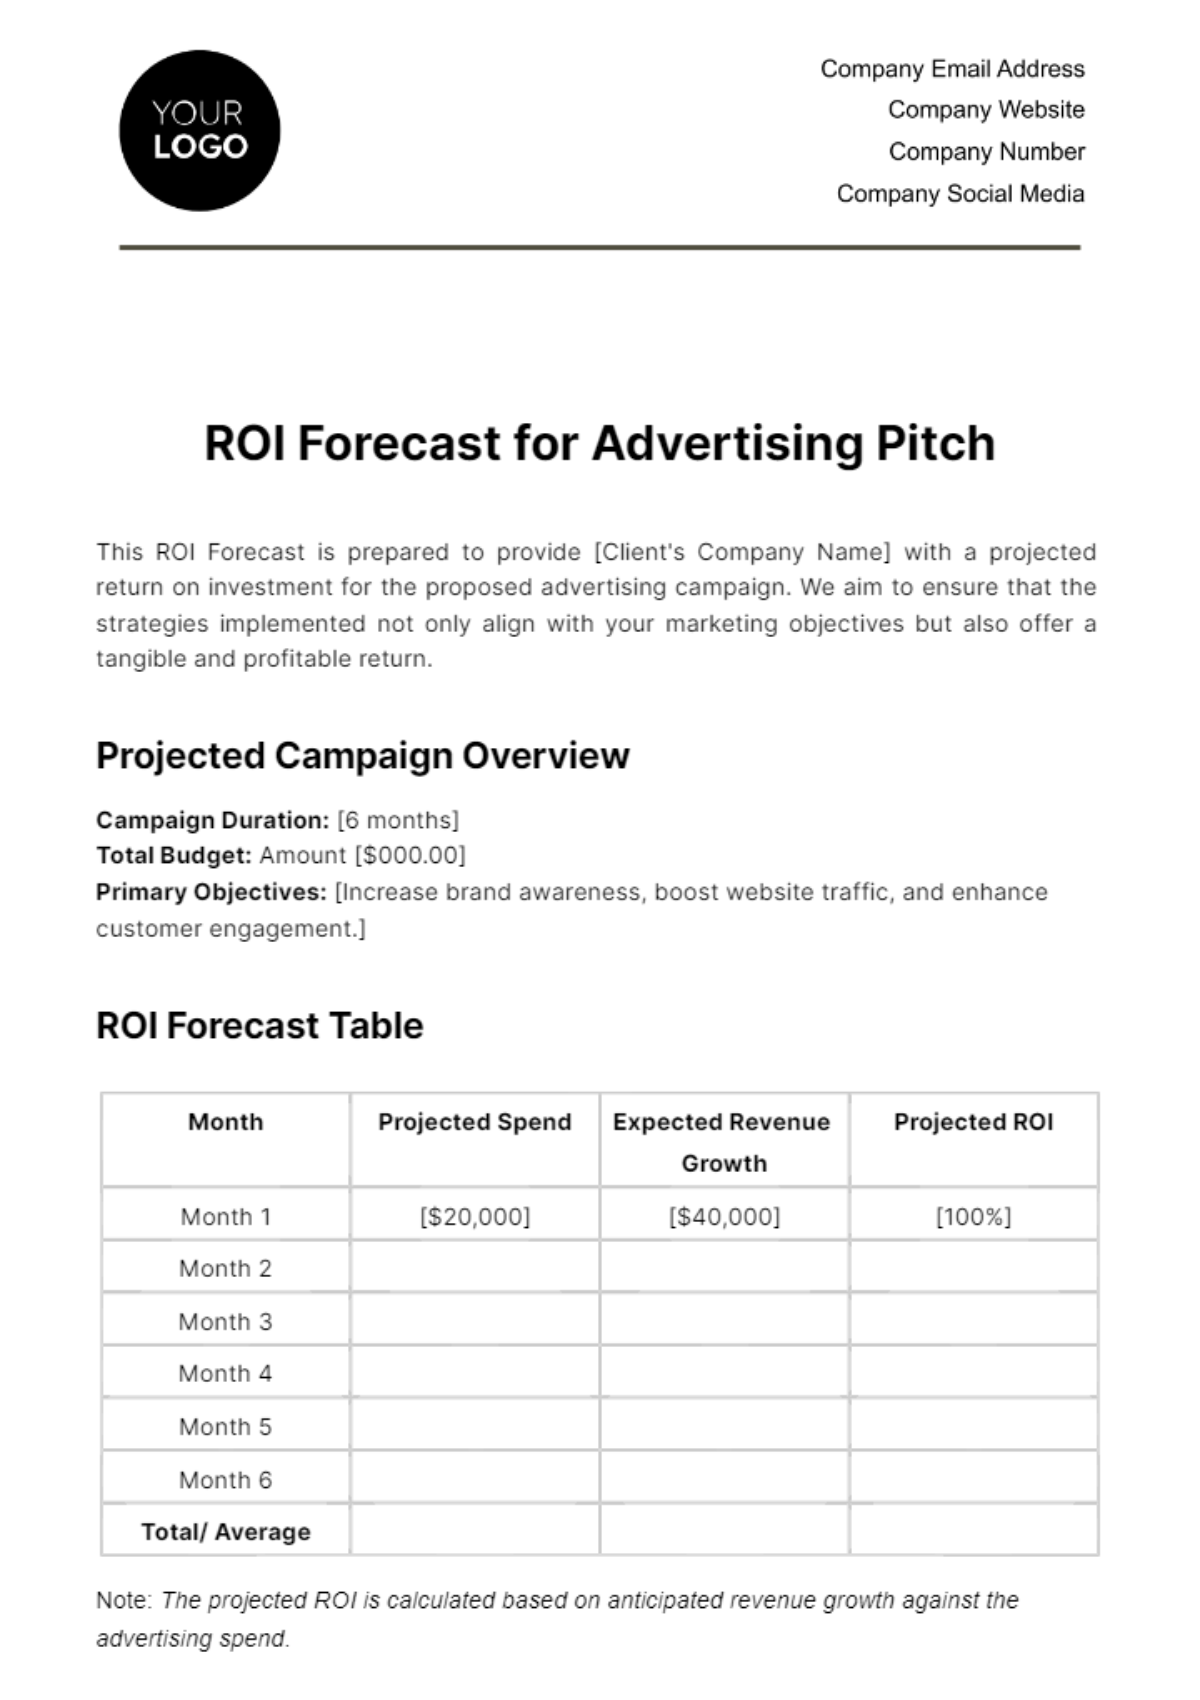 ROI Forecast for Advertising Pitch Template